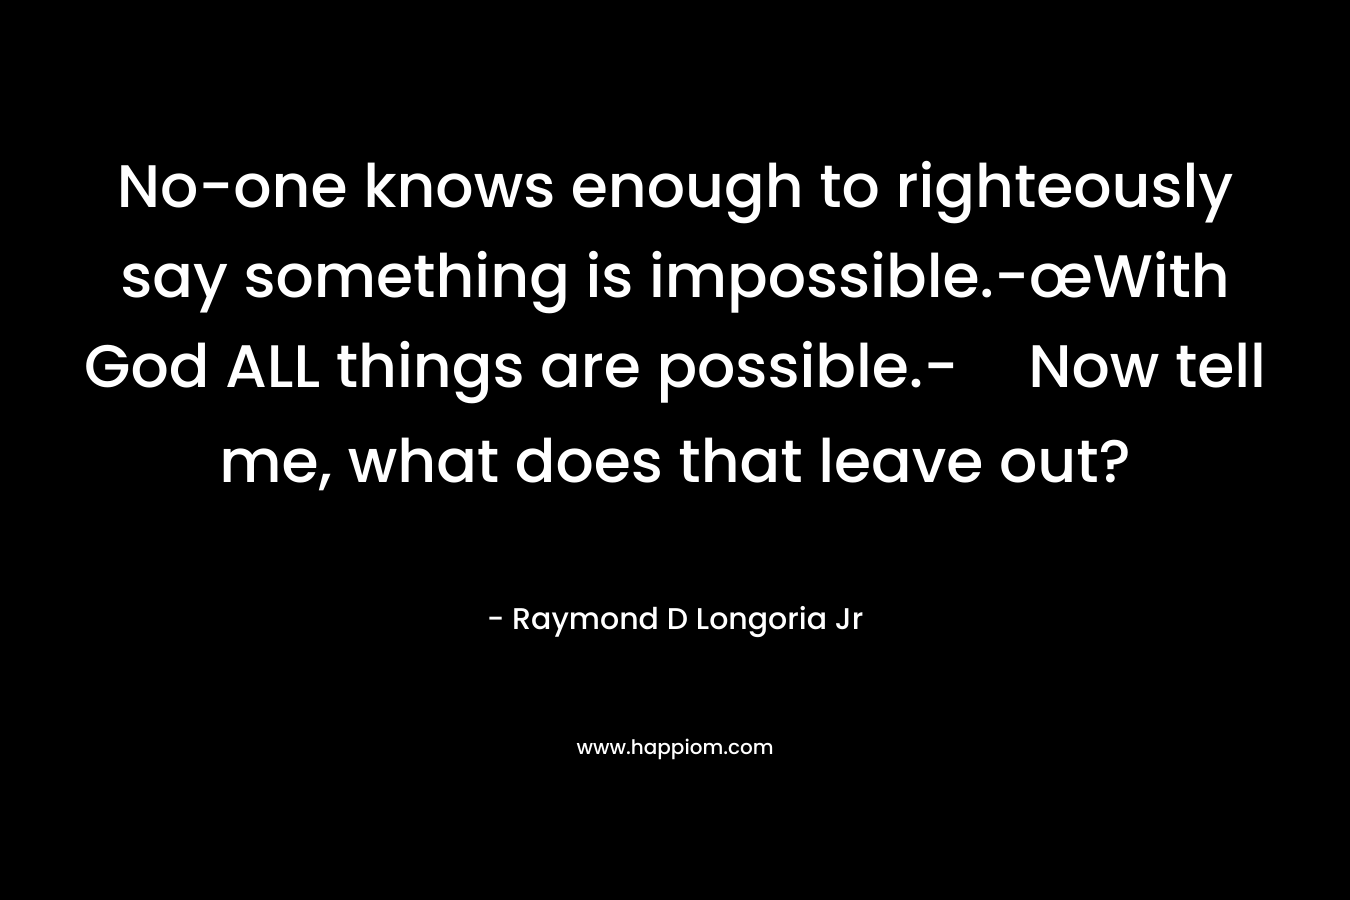 No-one knows enough to righteously say something is impossible.-œWith God ALL things are possible.-Now tell me, what does that leave out? – Raymond D Longoria Jr